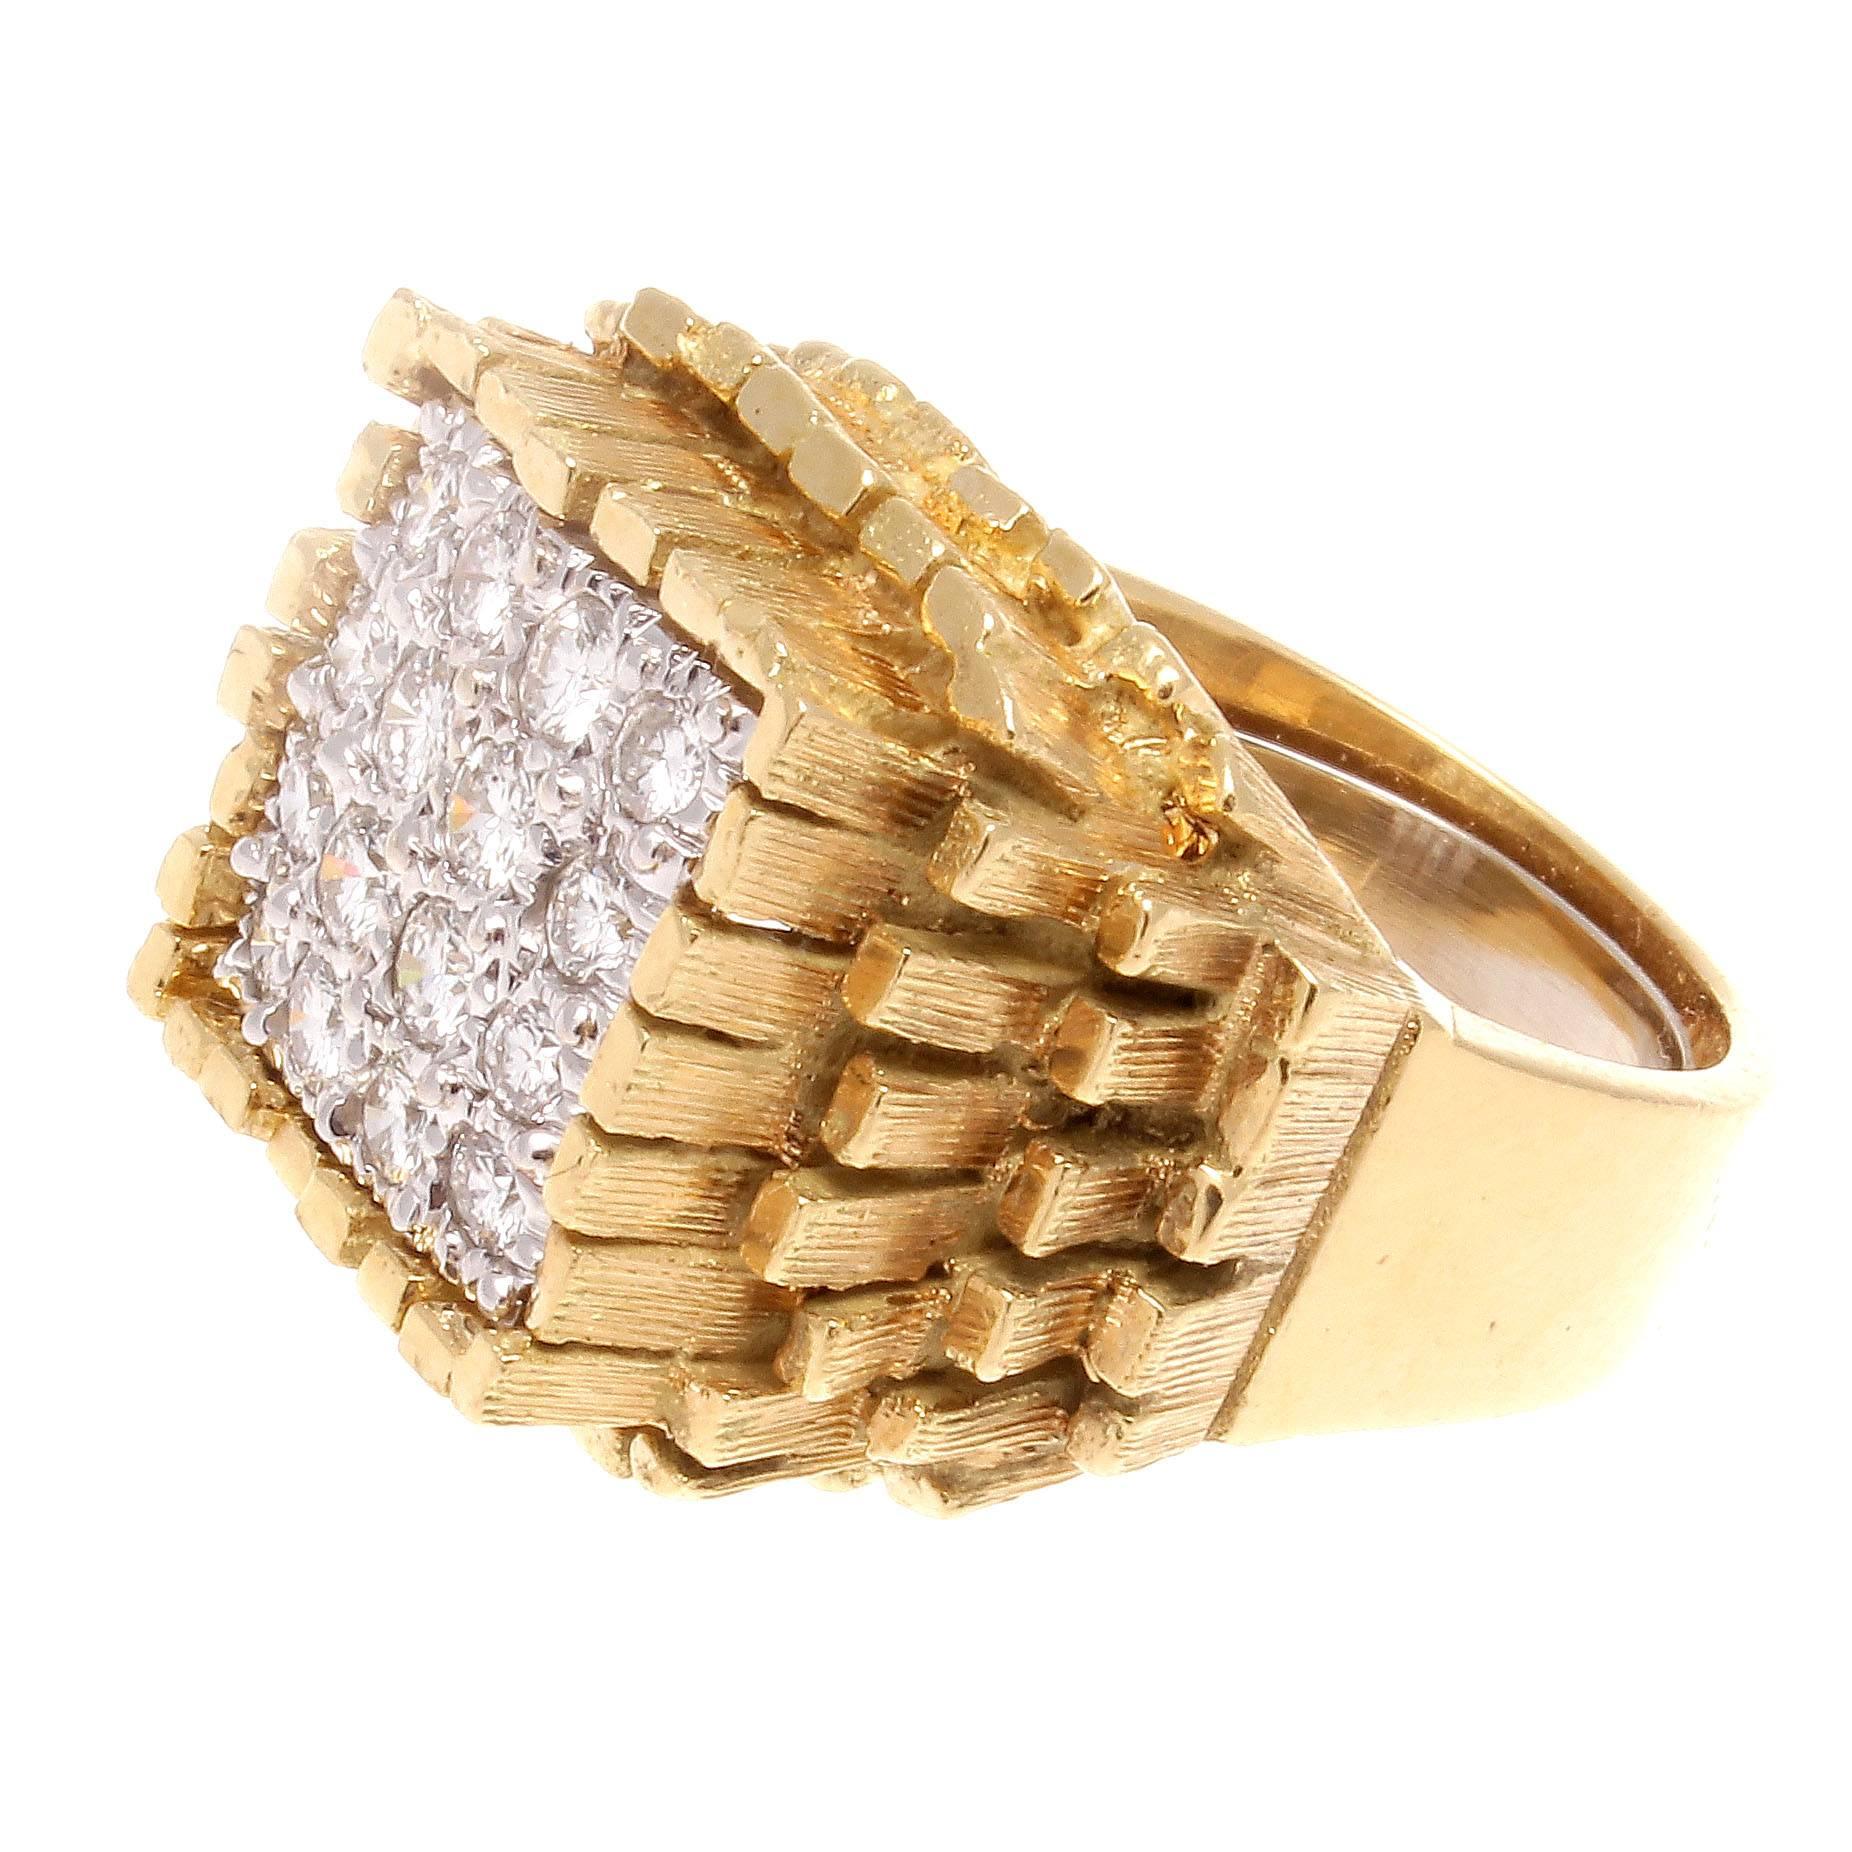 A rustic geological design that appears to have brought the rough to the ring. Elevated on mountains of glistening yellow gold the colorless diamonds are hidden at the peak where they are exposed for viewing. Crafted in 18k gold. Signed Hammerman